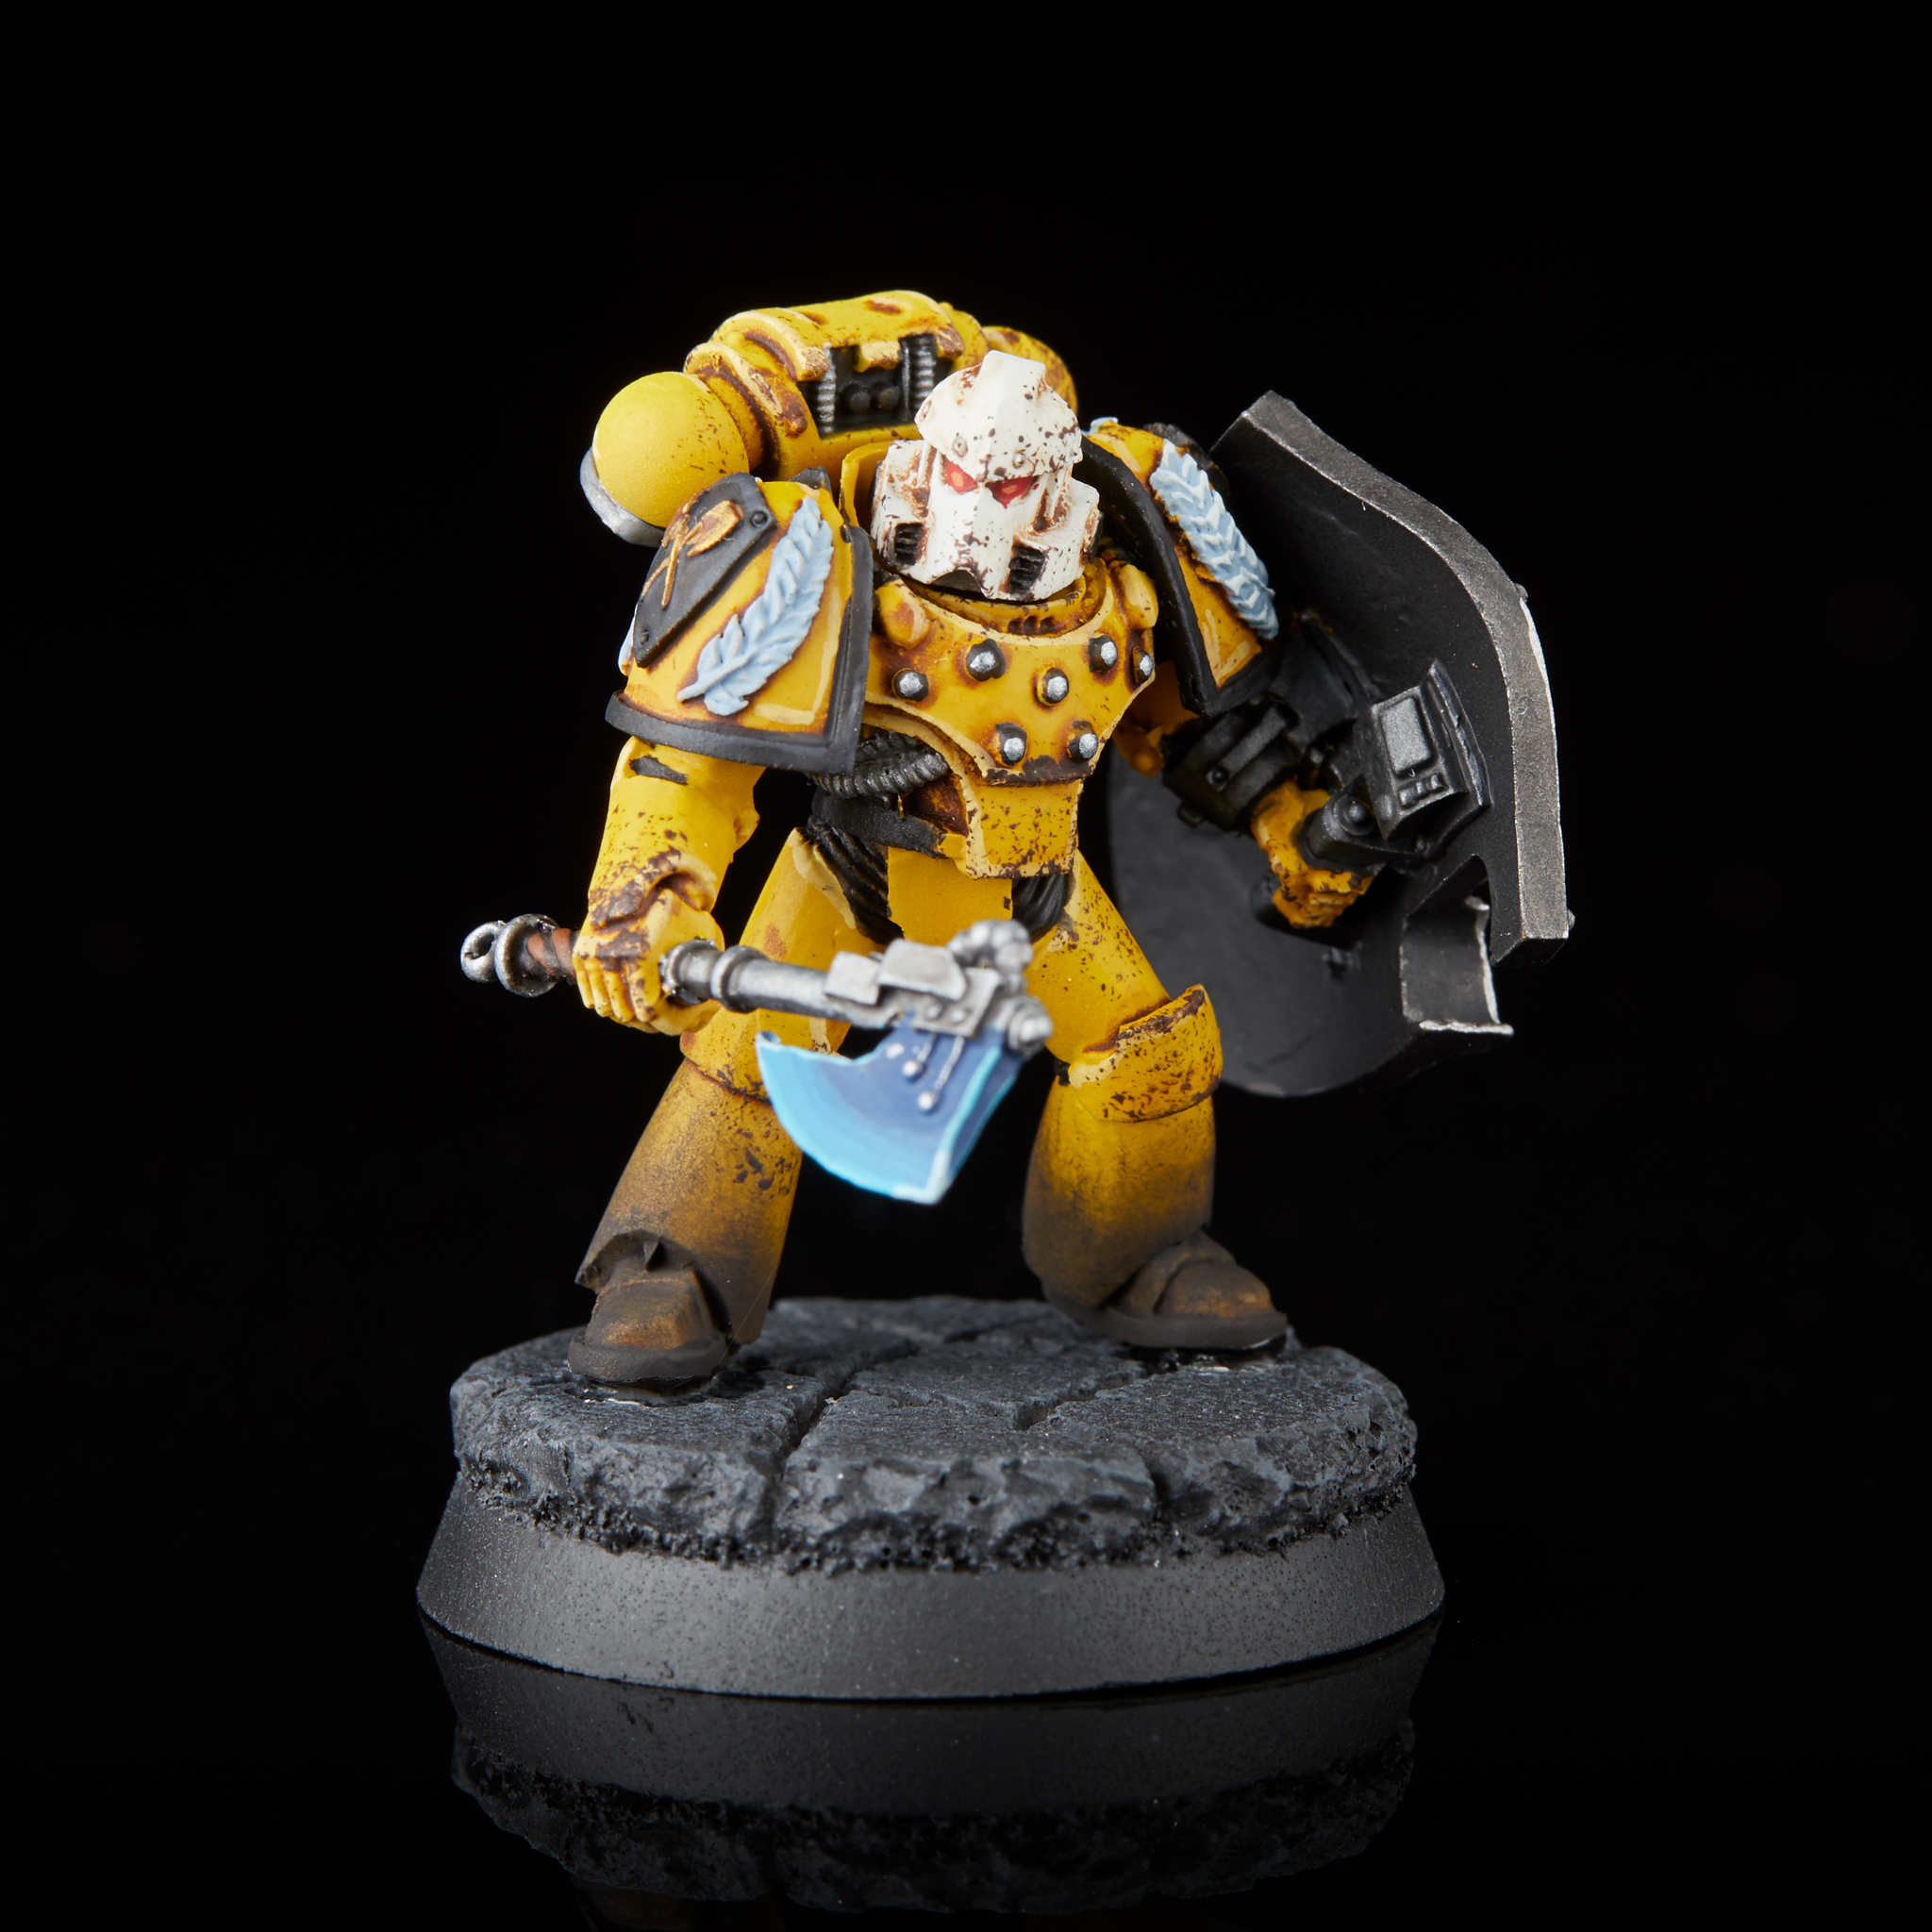 Rogal Dorn, Primarch of the Imperial Fists